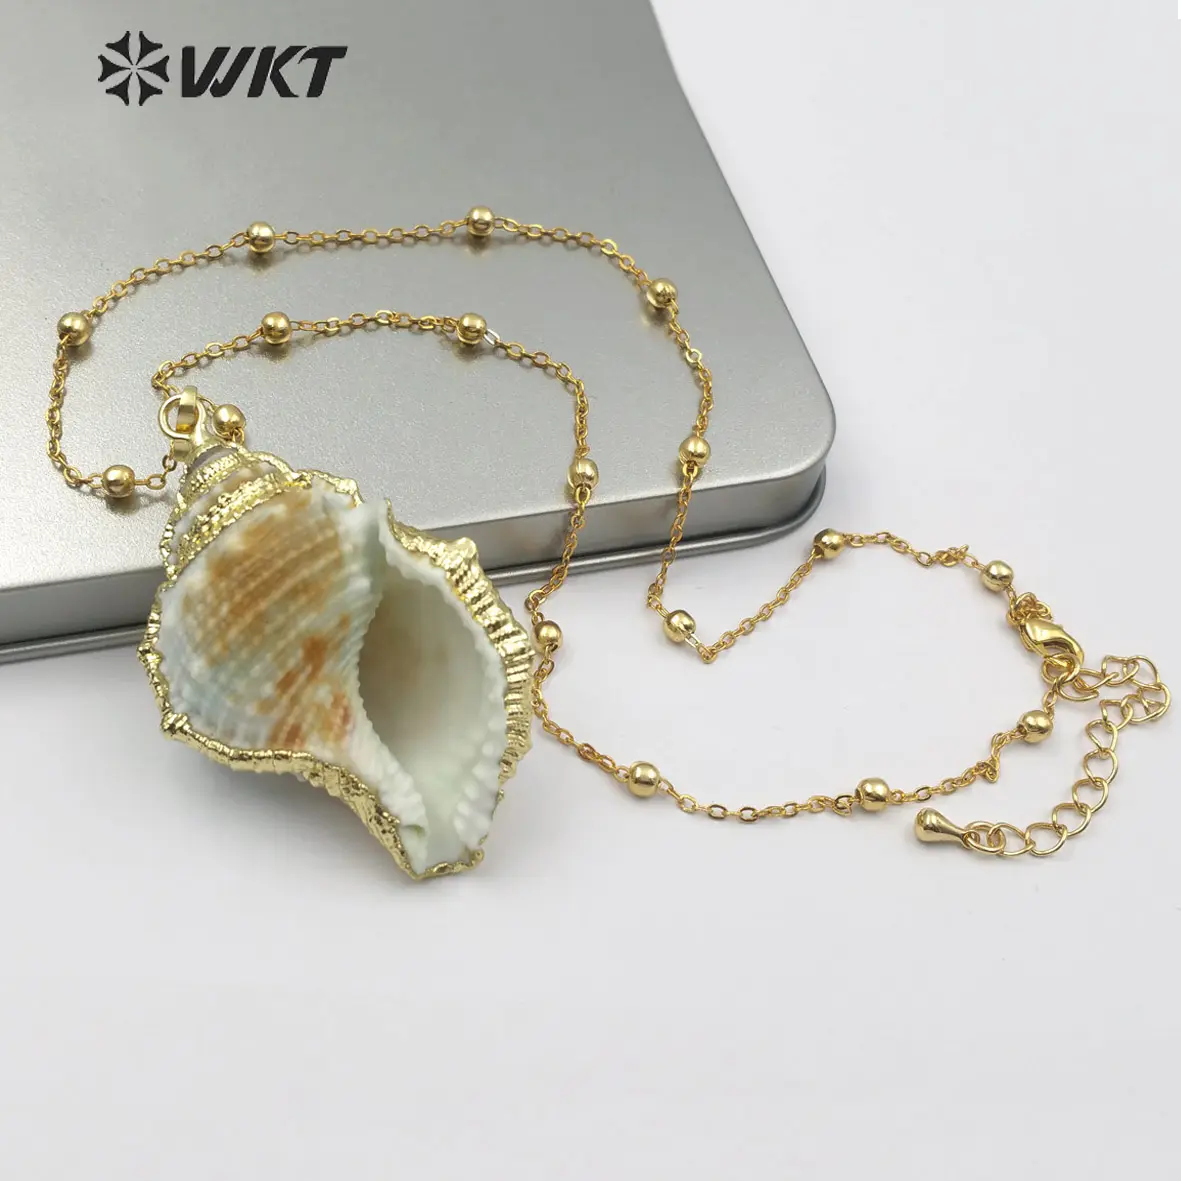 WT-JN072 Bohemian Style 18K Gold Plated Shell Jewelry 18 inch Natural Sea Shell Pendant White and Brown Trumpet Necklace